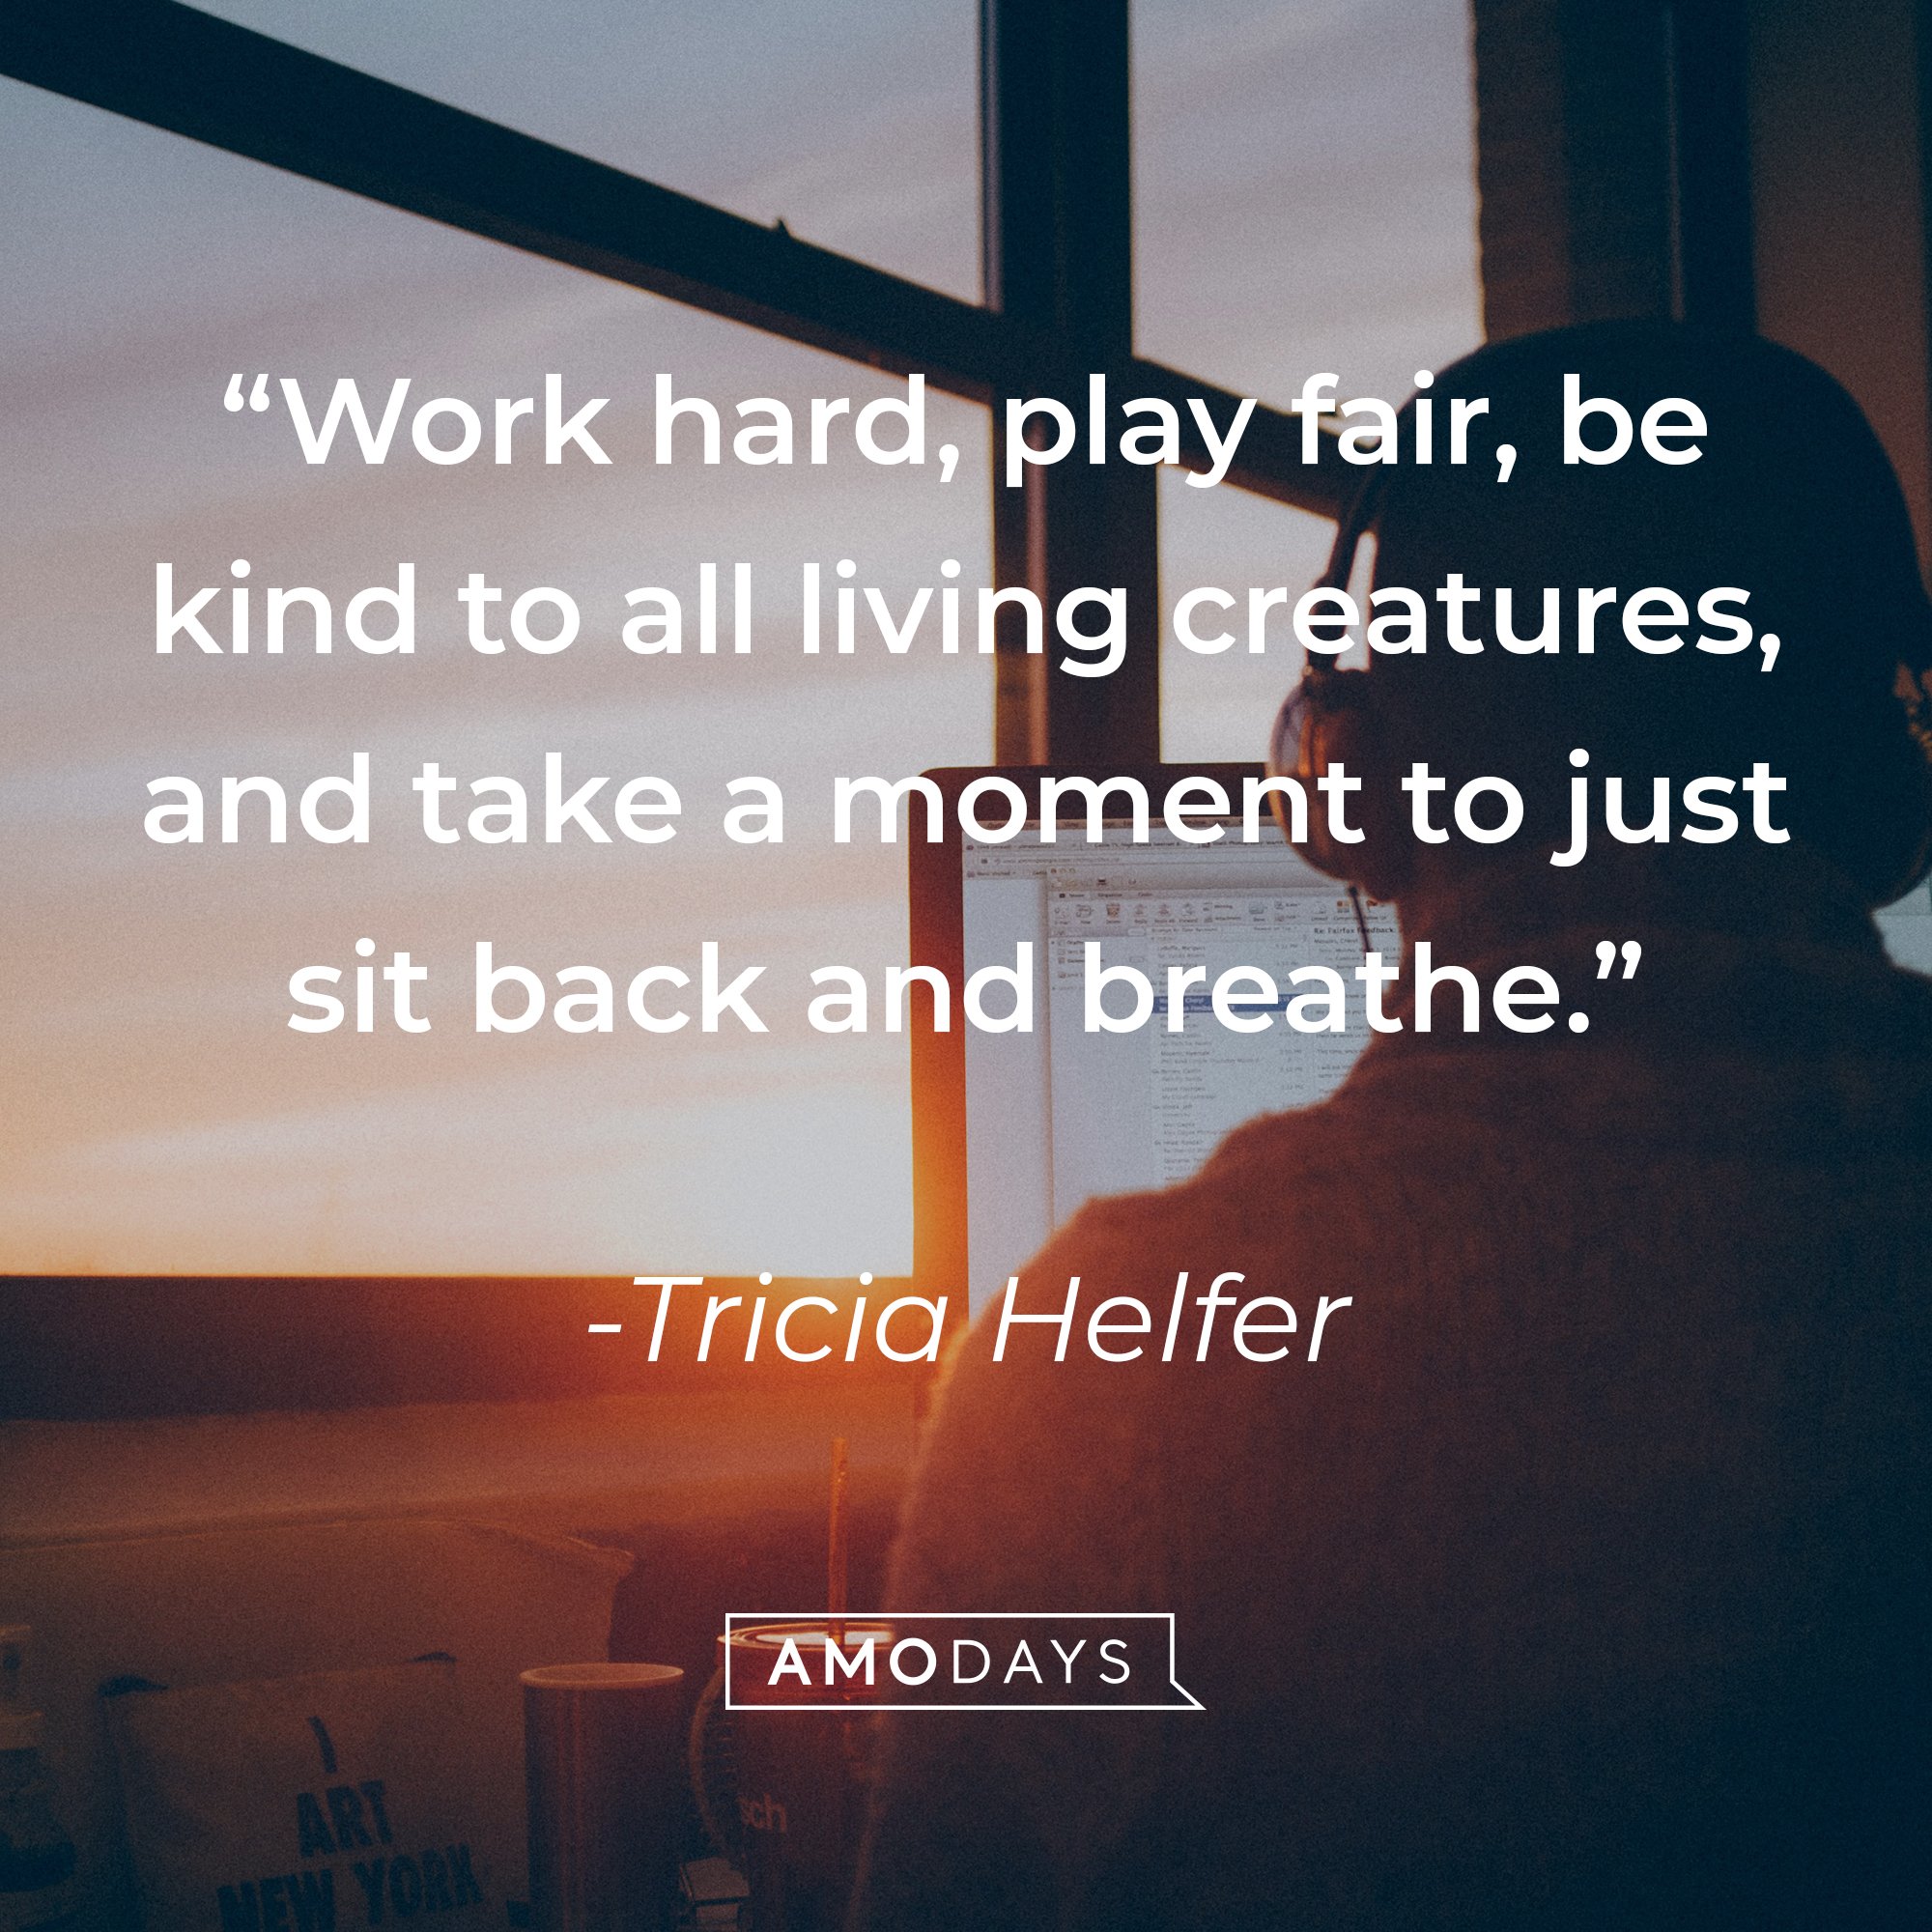 Tricia Helfer's quote: "Work hard, play fair, be kind to all living creatures, and take a moment to just sit back and breathe." | Image: AmoDays